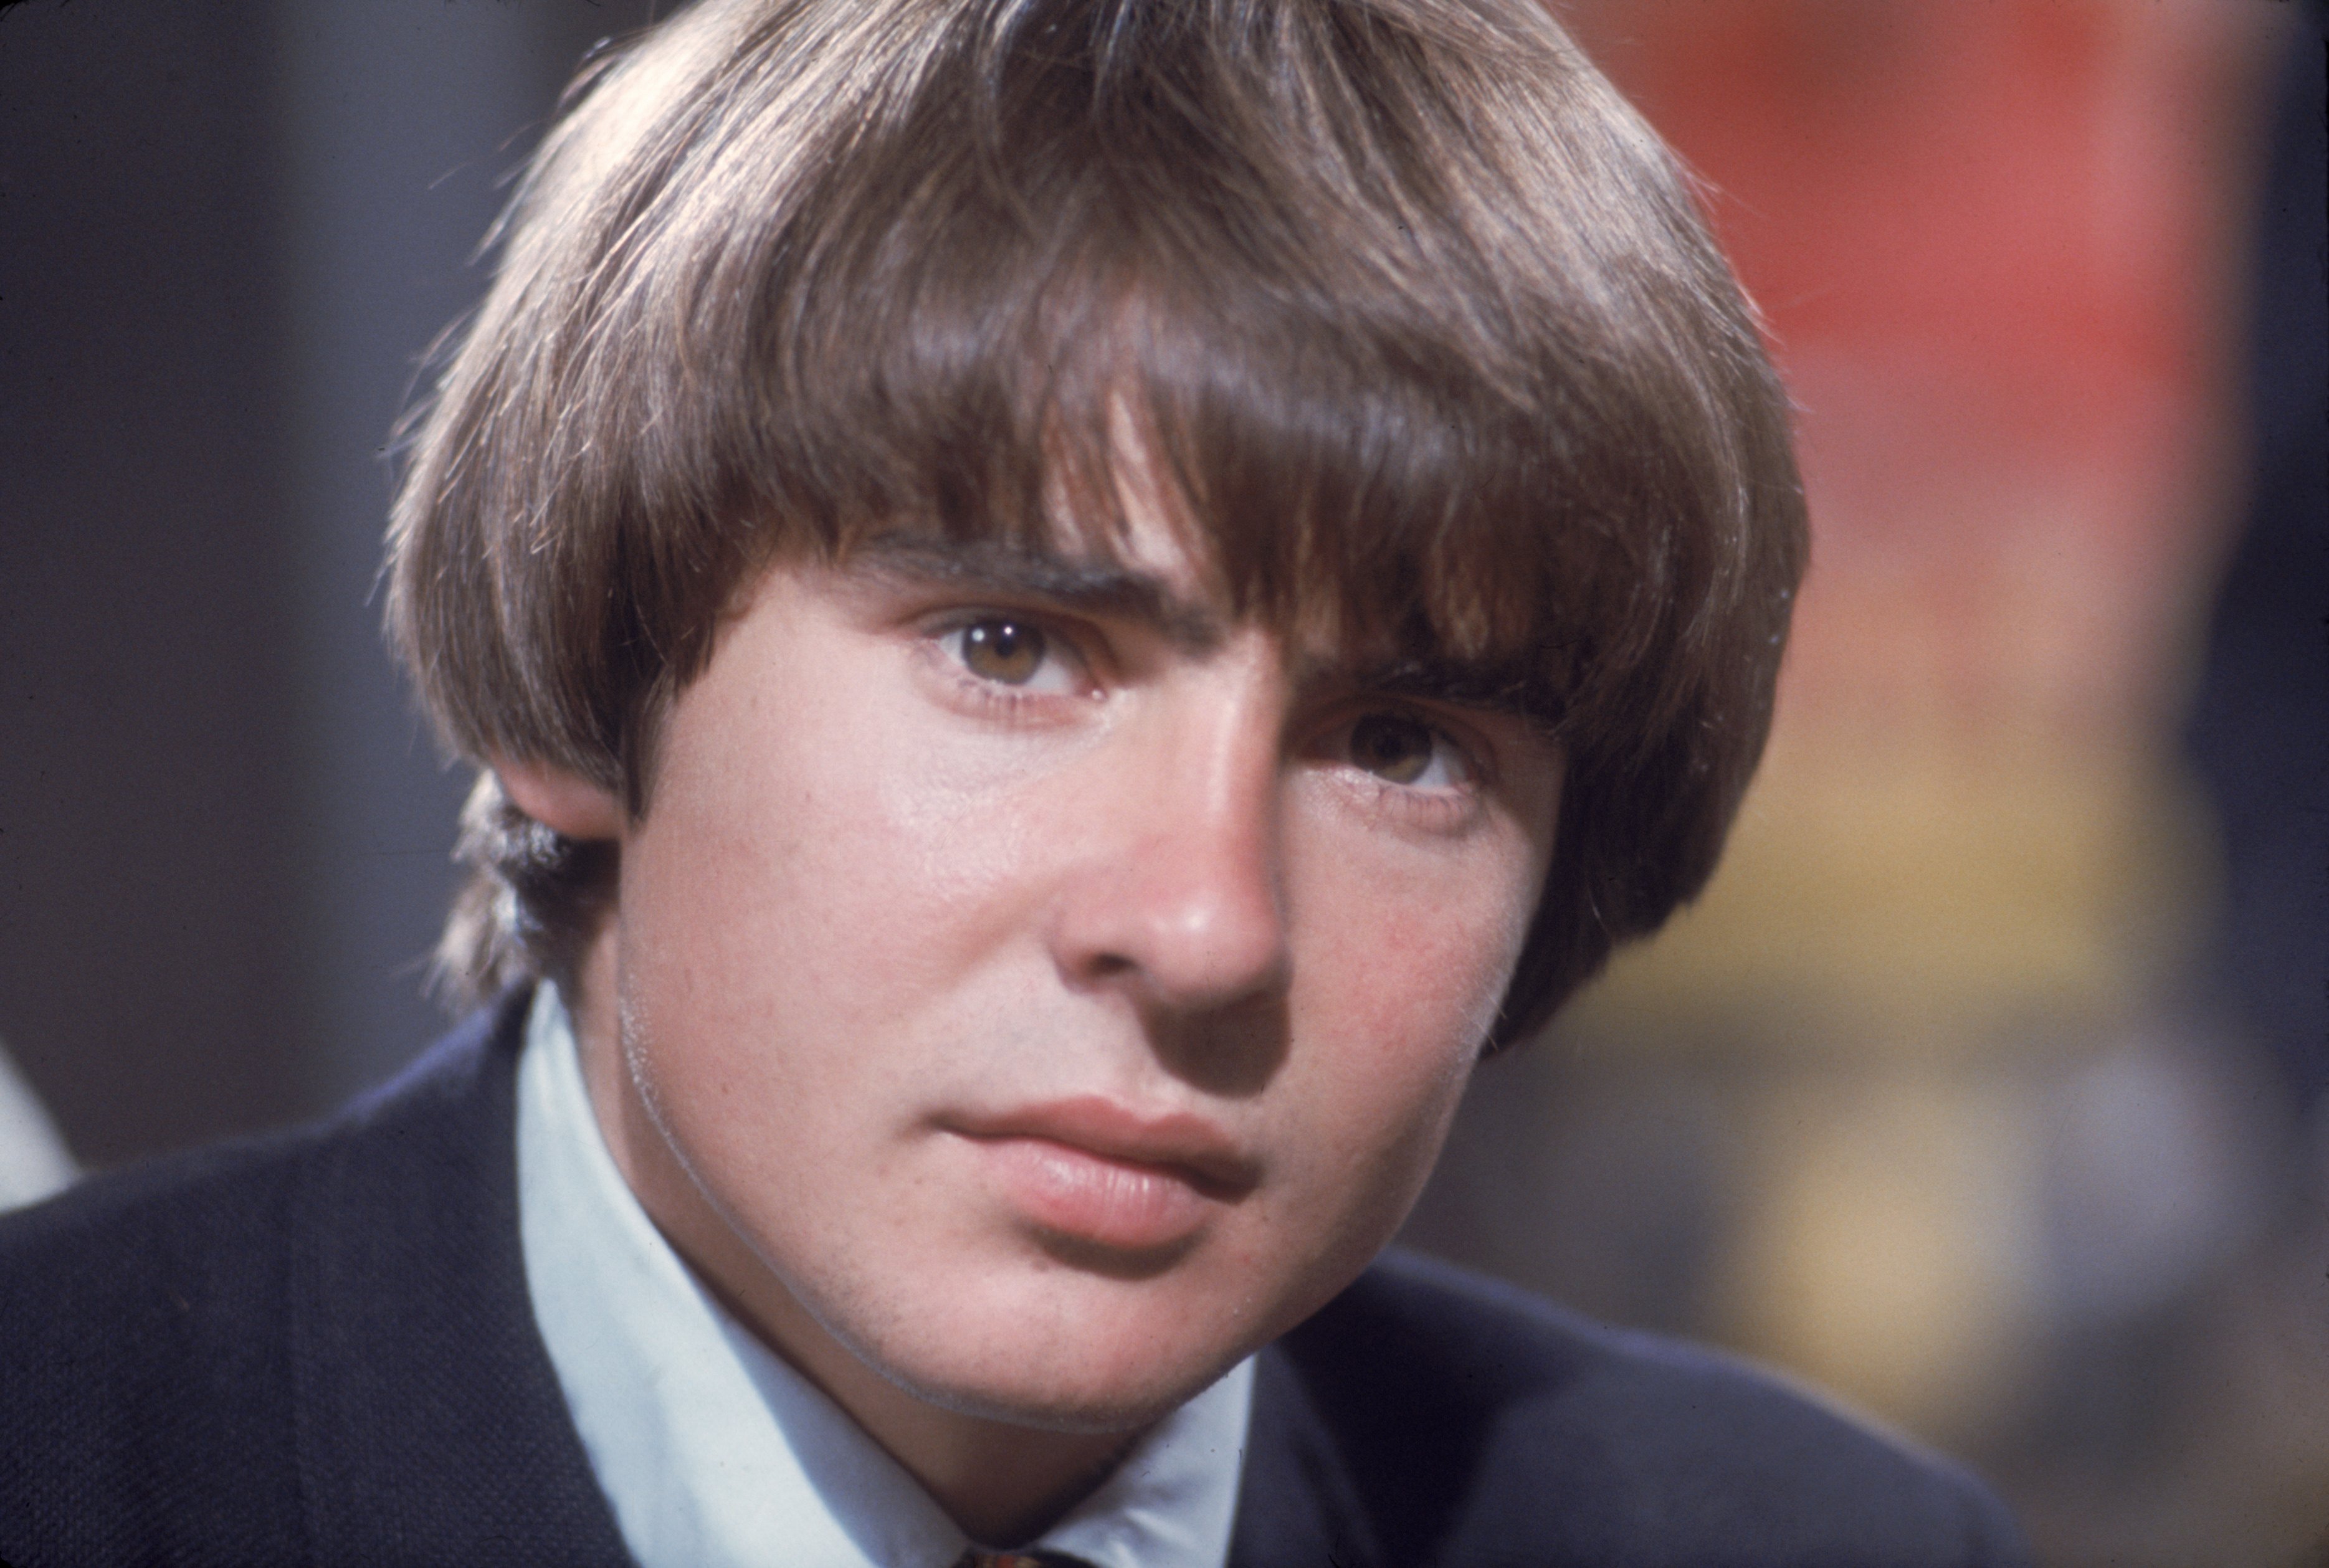 Davy Jones of the Monkees in a suit